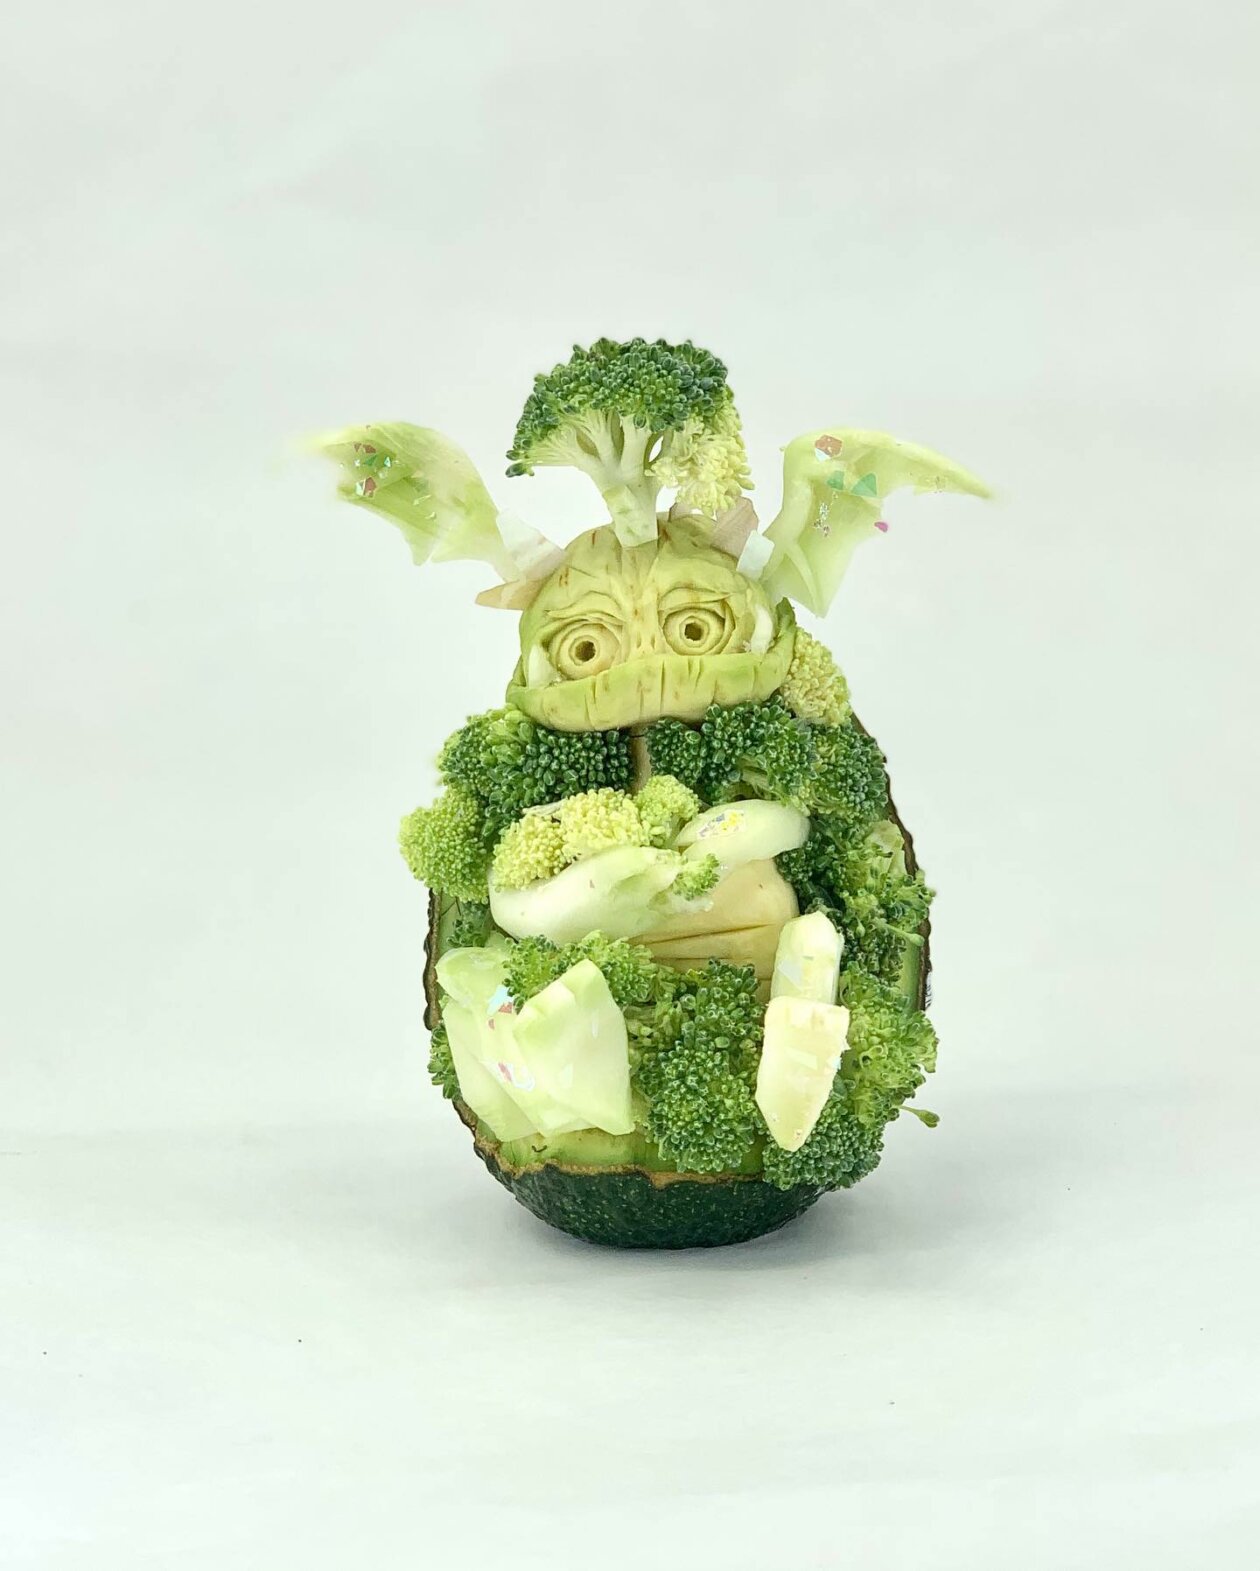 Superb Fruit And Vegetable Carvings By Daniele Barresi 13